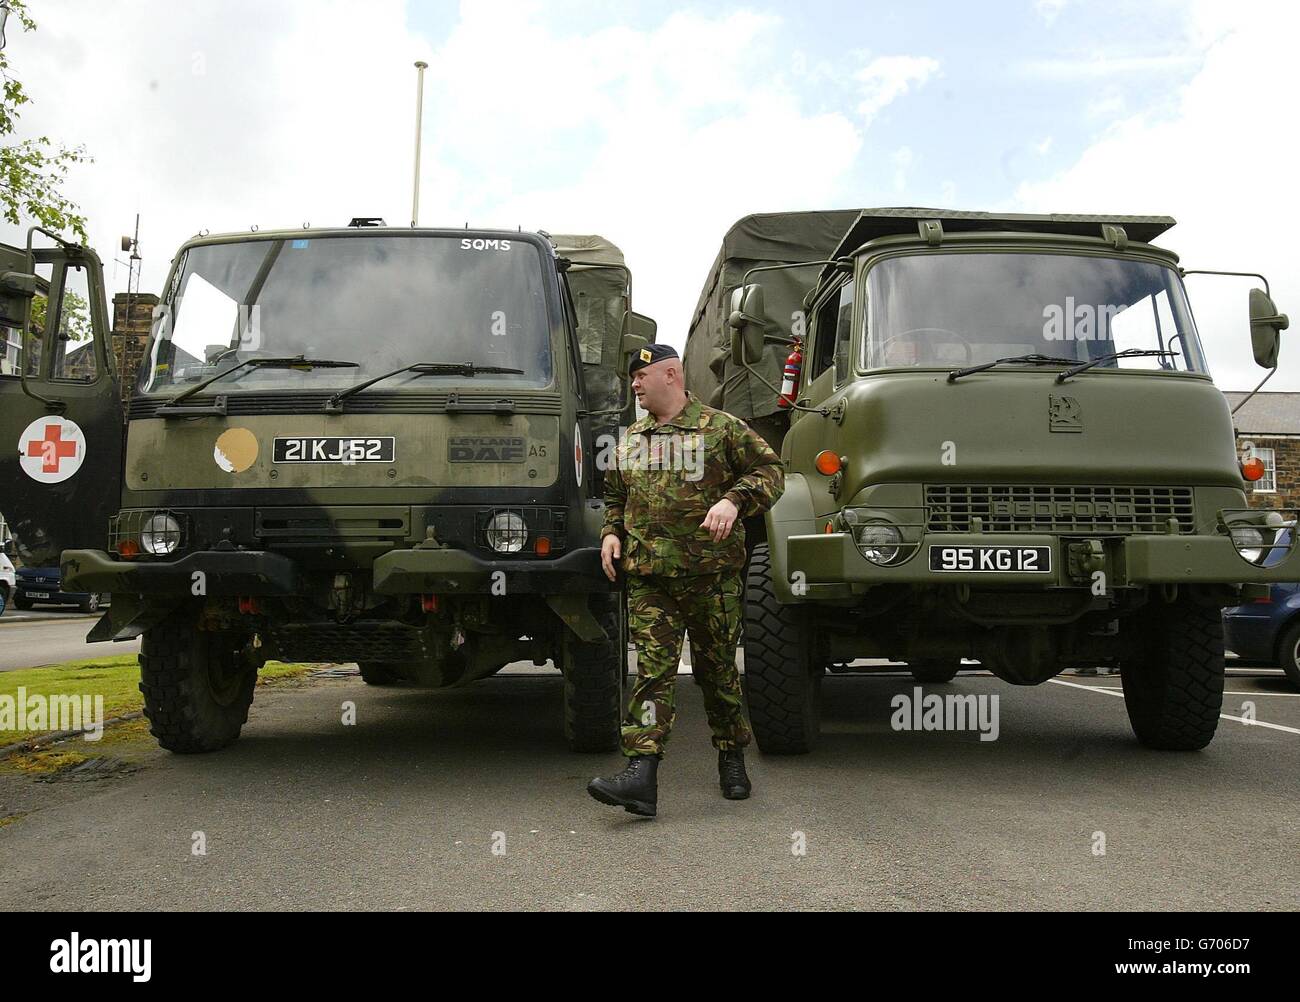 Two trucks used by The Queen's Lancashire Regiment, which were shown to the media at Fulwood Barracks in Preston, Lancashire. The one on the left, a four-ton Leyland Daf, was used by the QLR in Basra, Iraq, and the one on the right, a four-ton Bedford MK, is the type of vehicle in which the Army believes the pictures were taken but which has never been to Iraq. Stock Photo